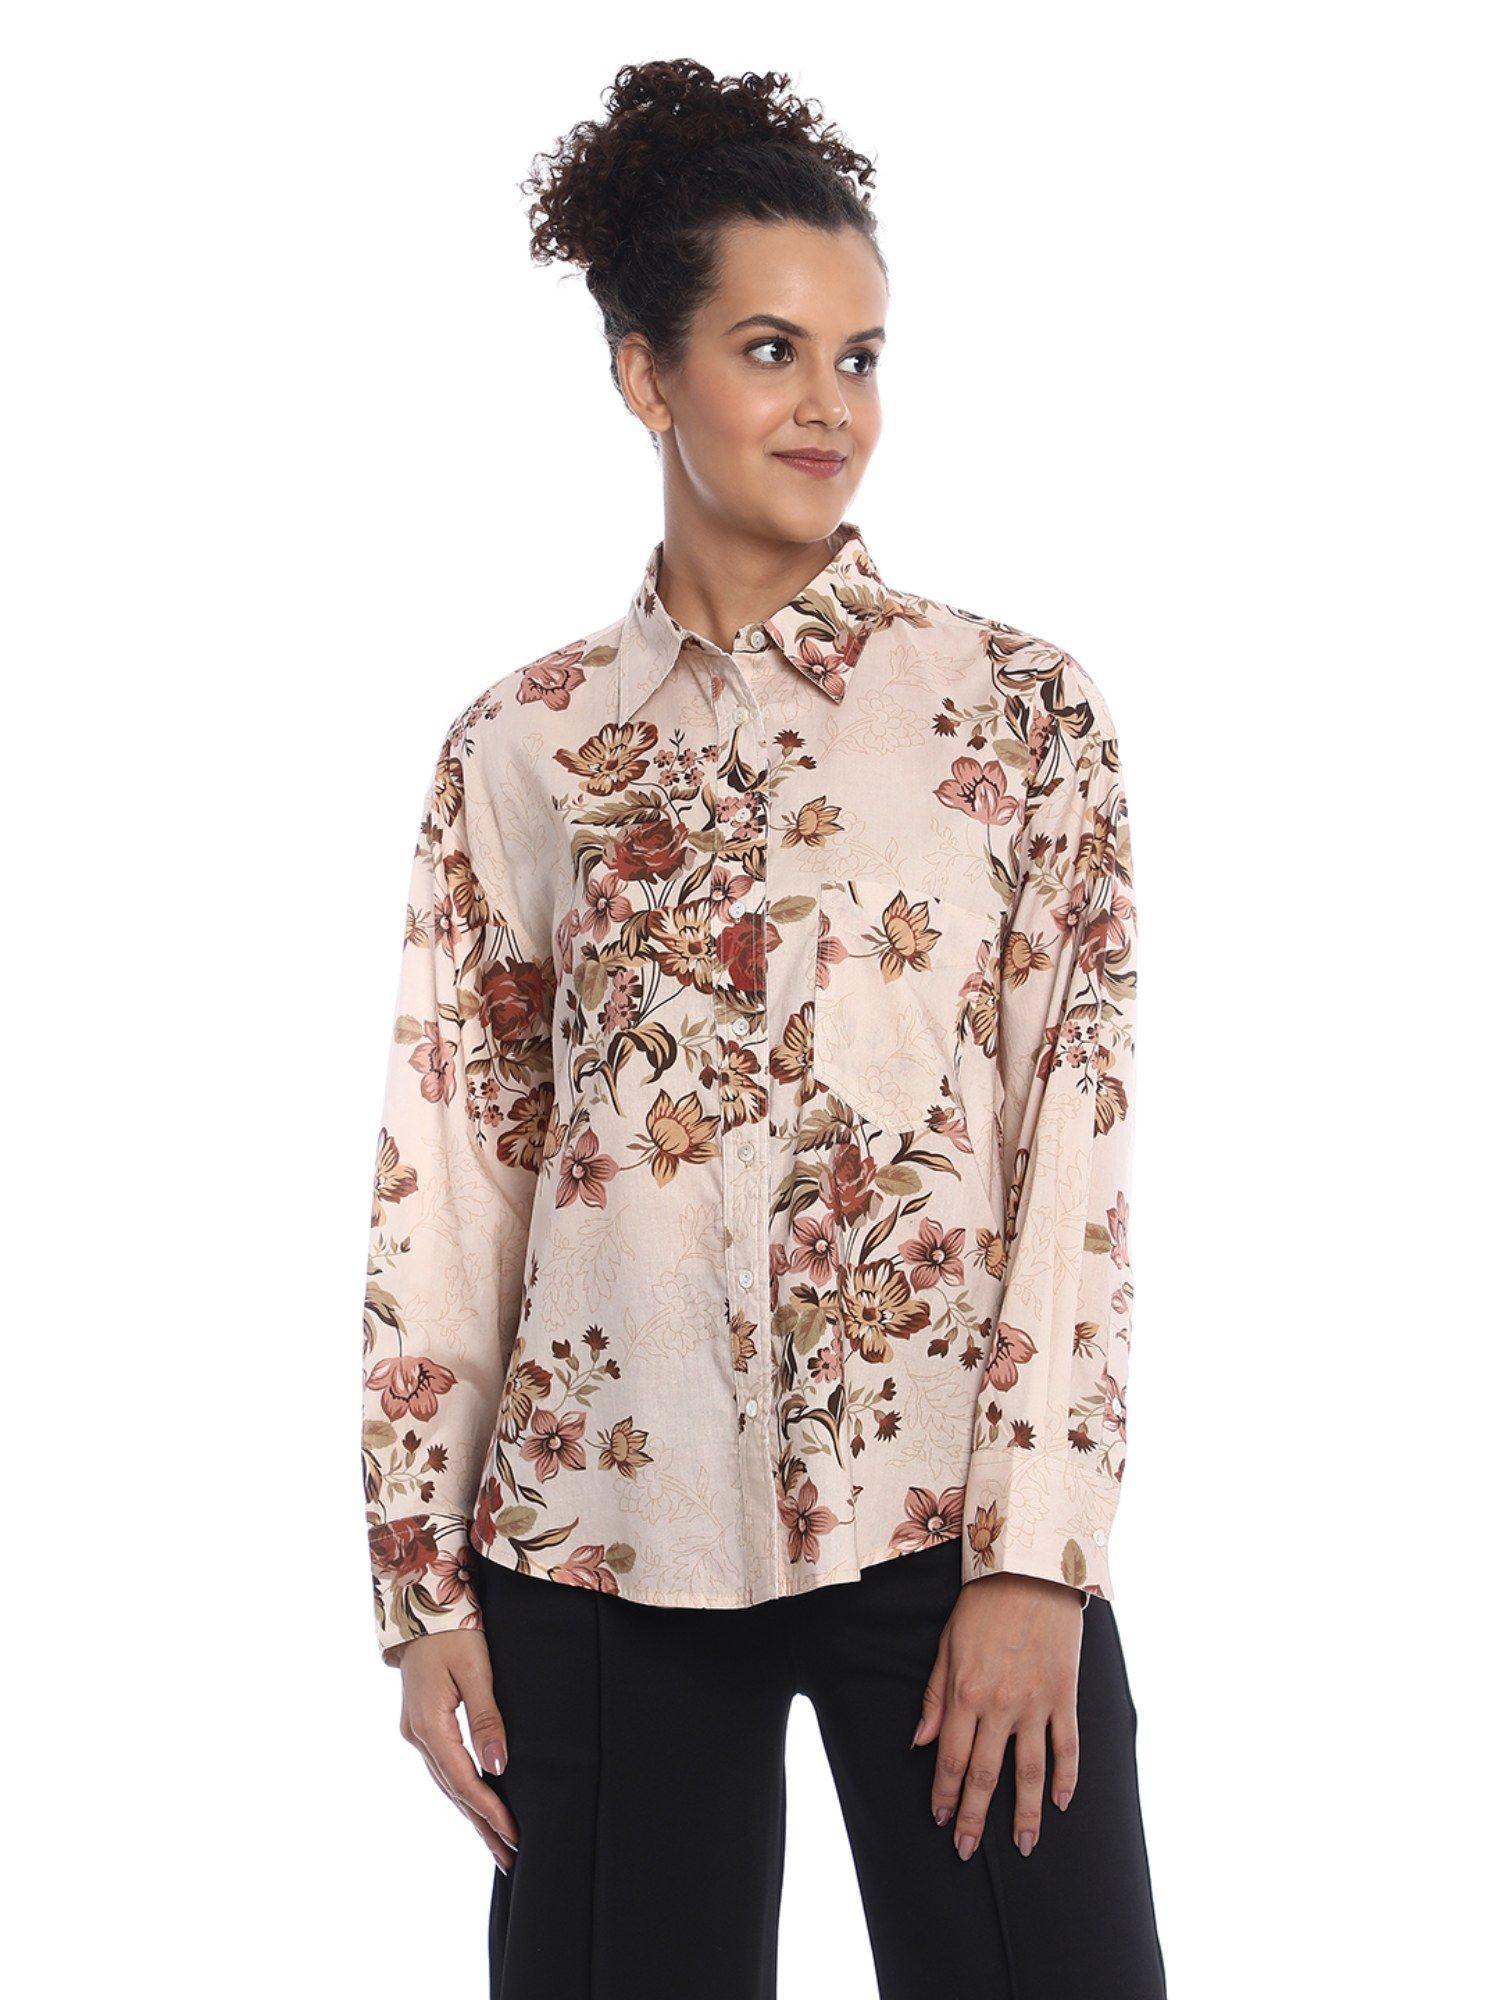 bellora beige floral printed cotton oversized shirt for women